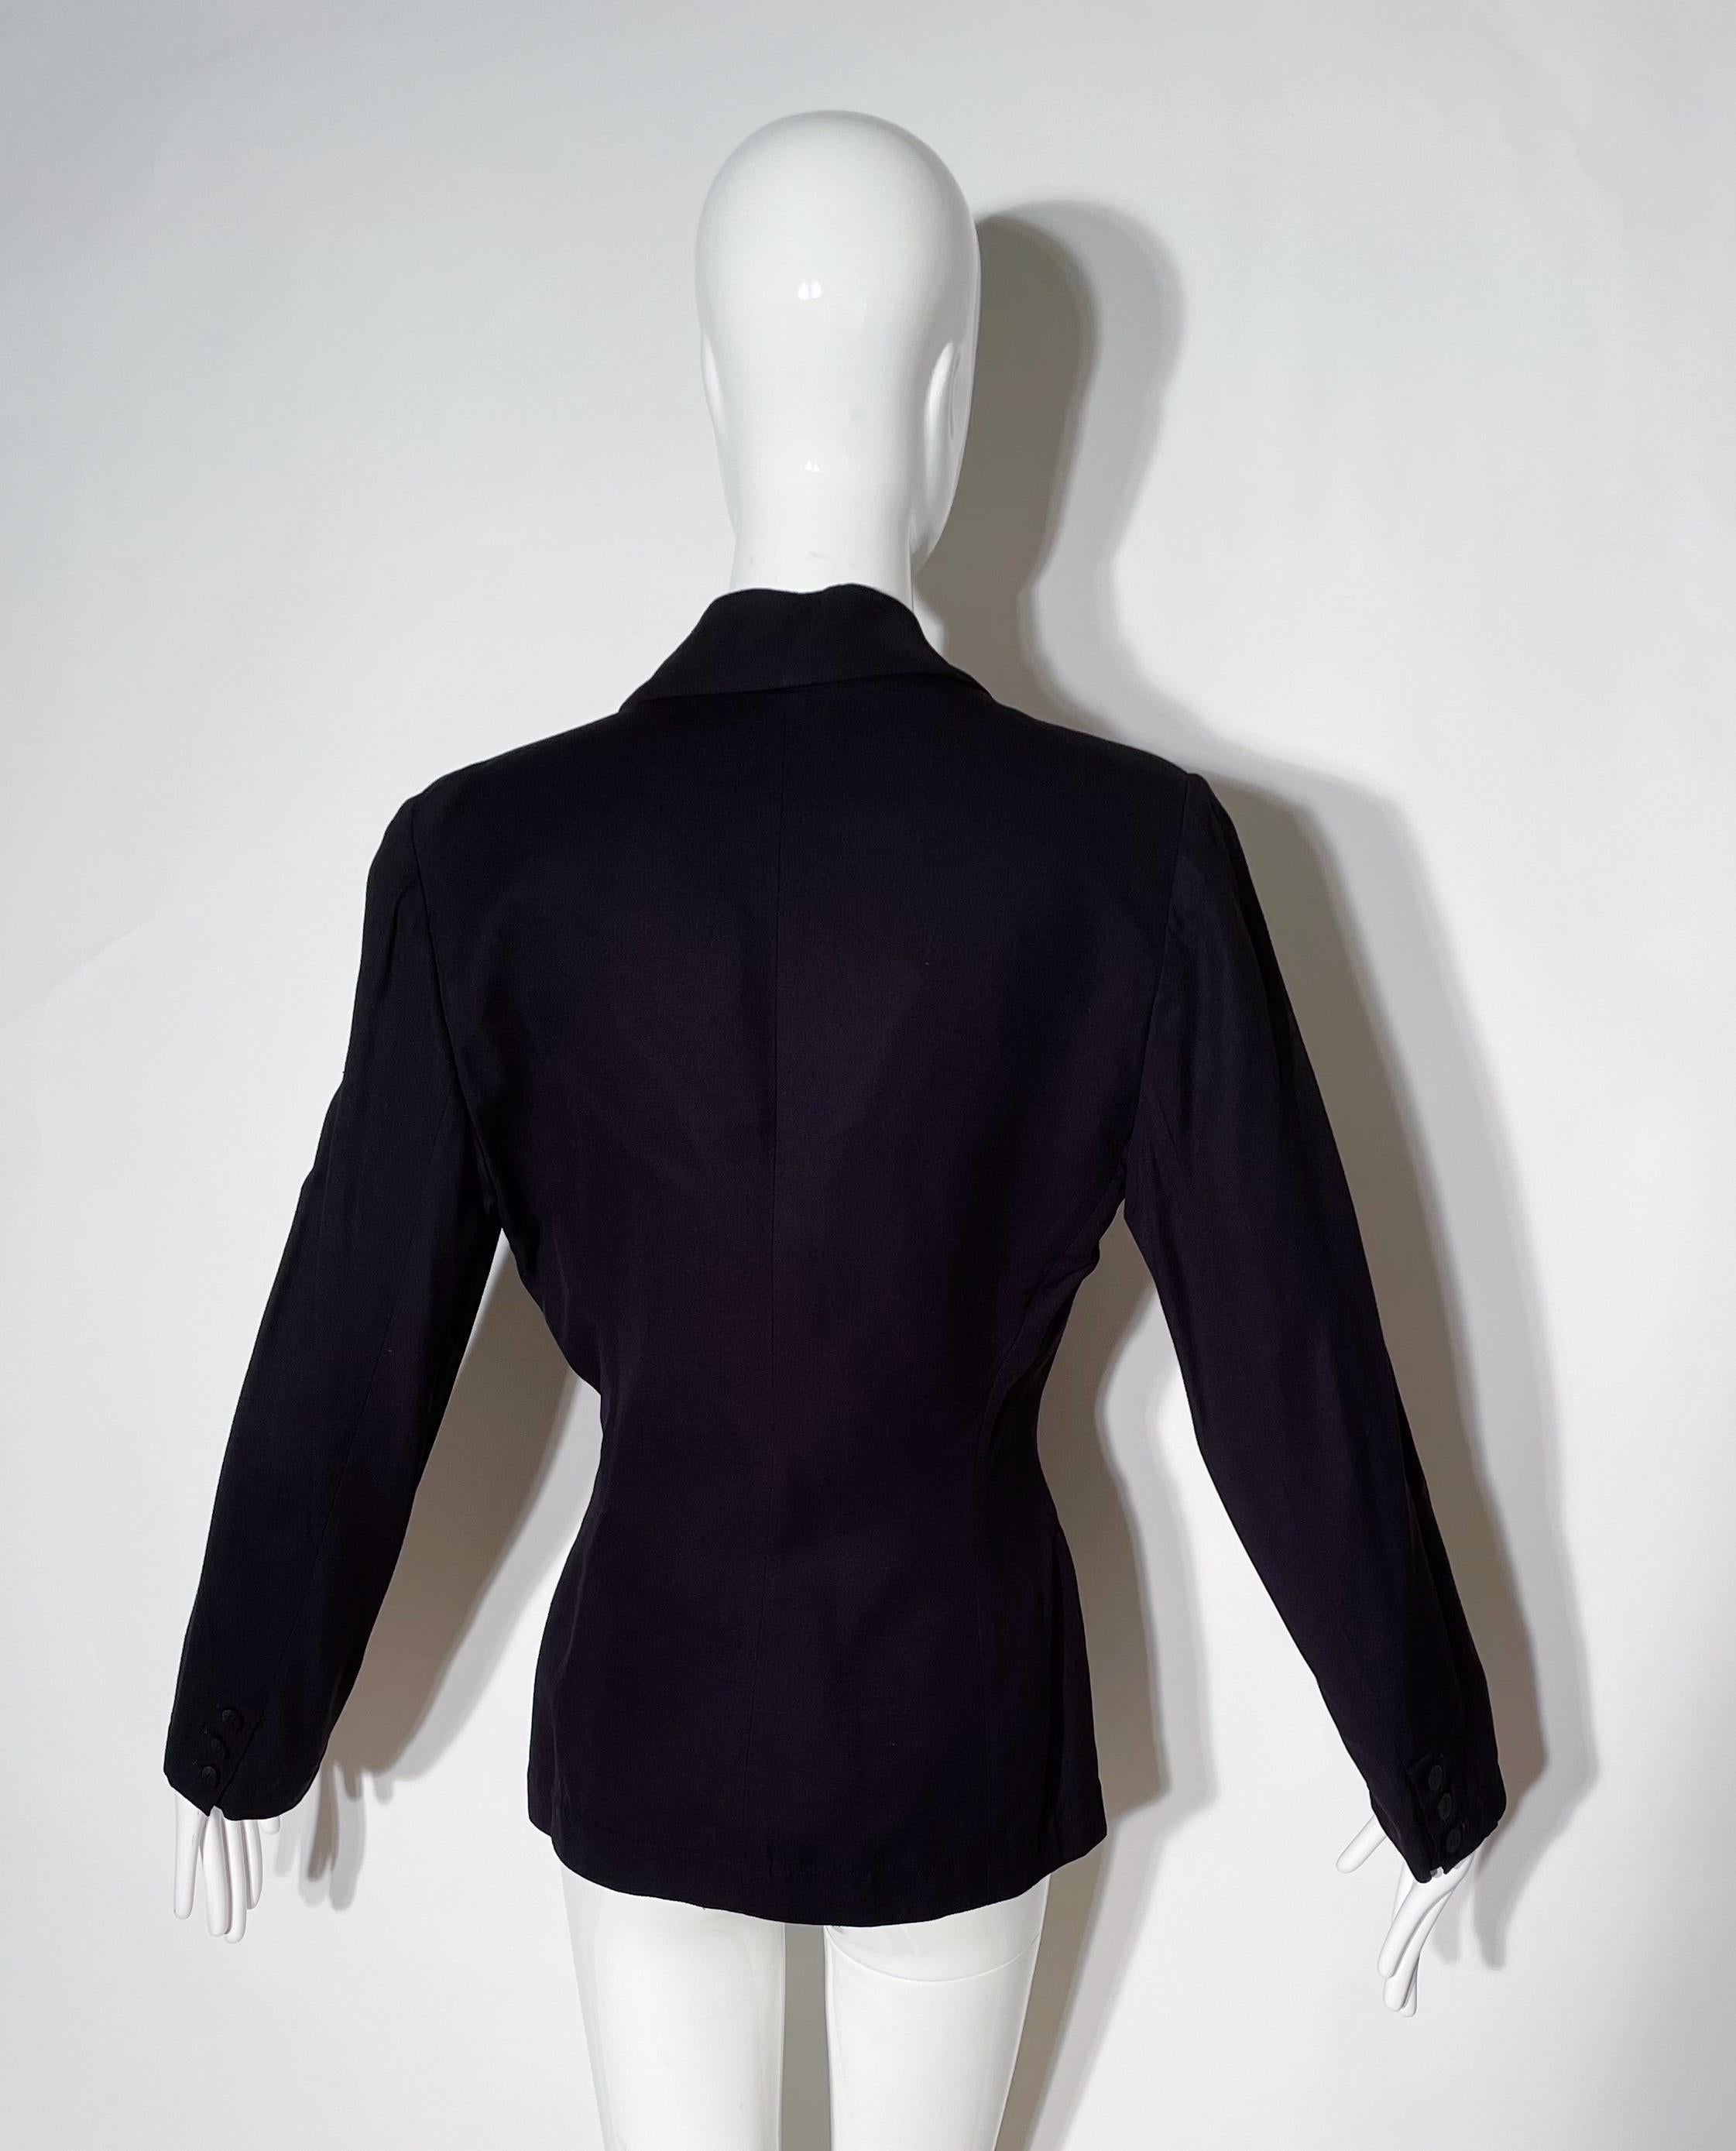 Alaia Double Breasted Blazer In Excellent Condition For Sale In Los Angeles, CA